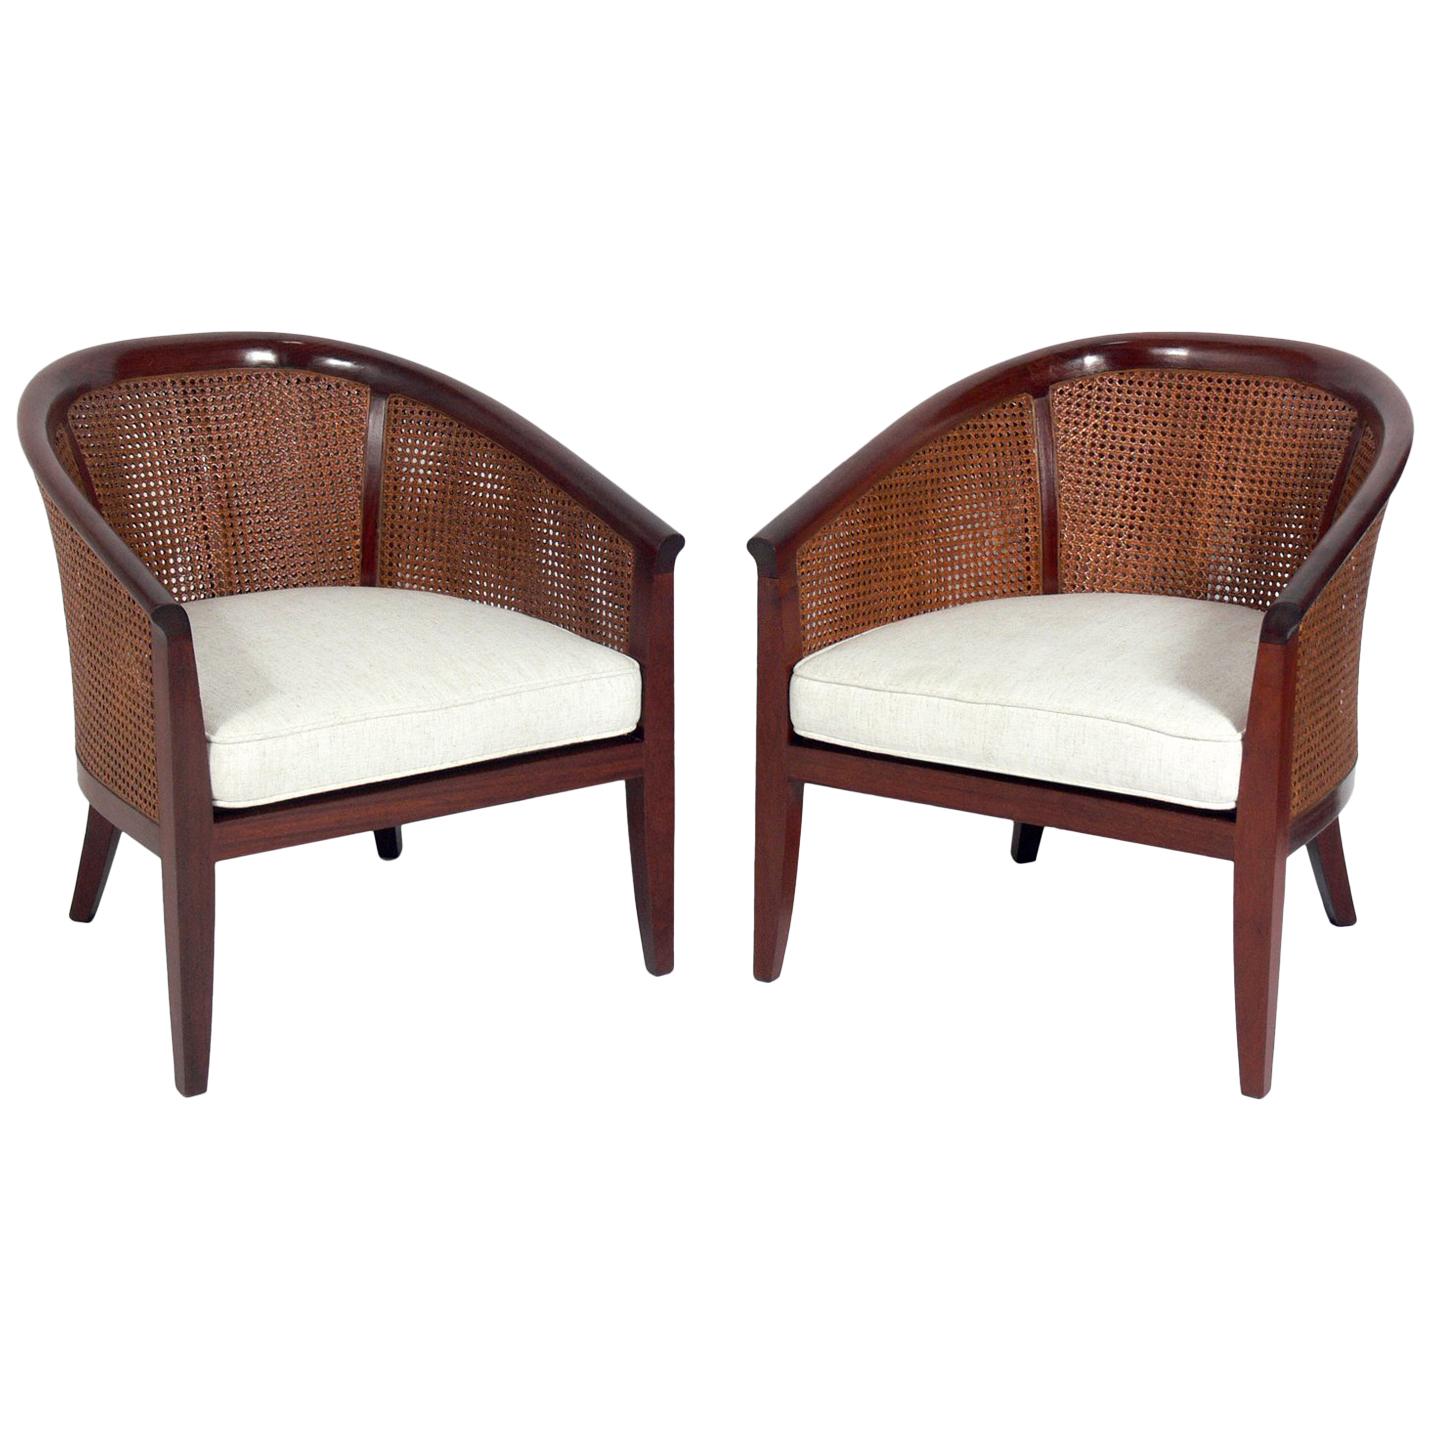 Pair of Elegant Caned Back Tub Chairs